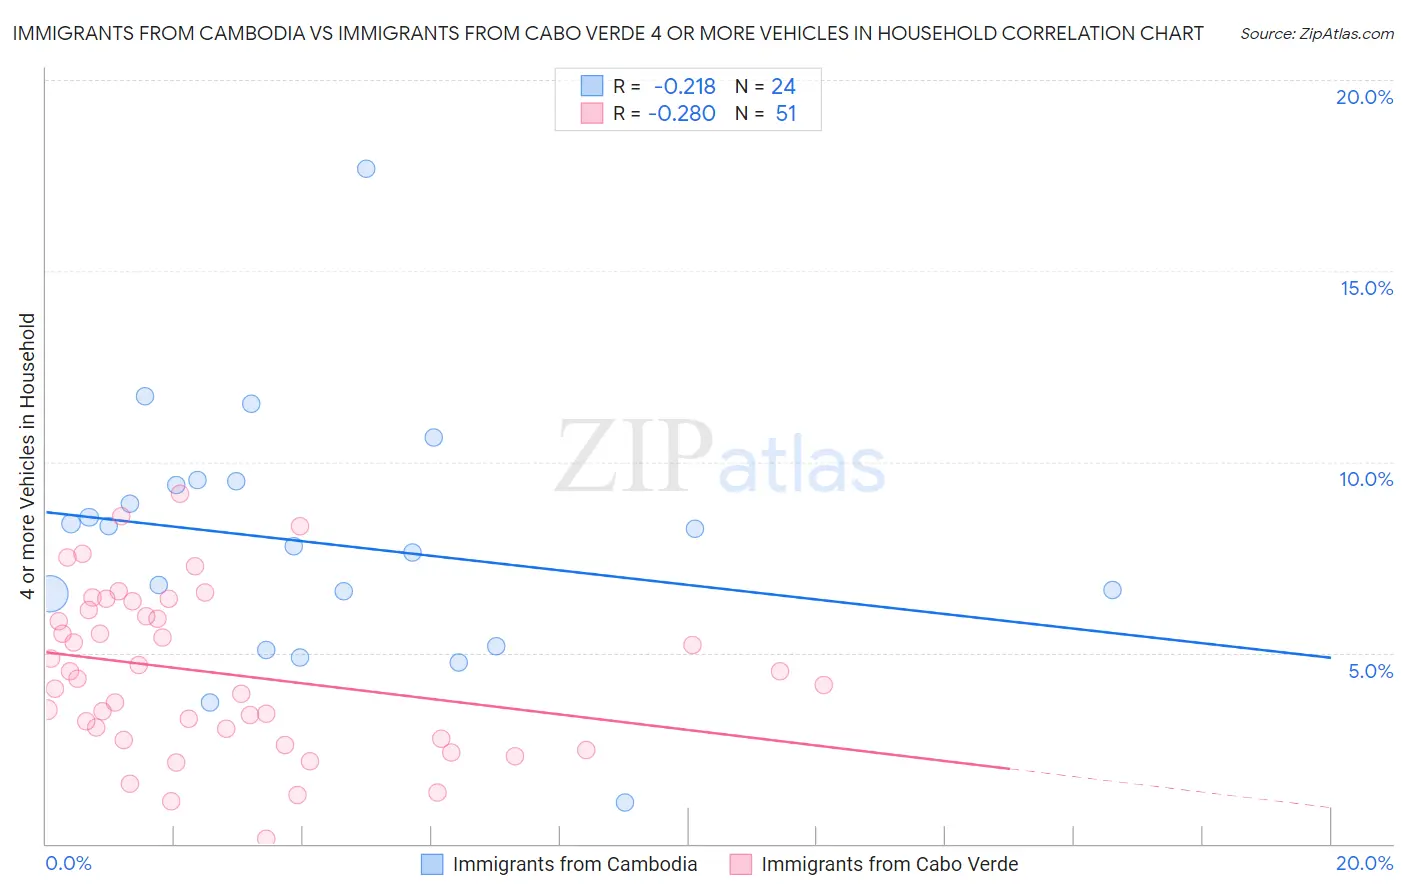 Immigrants from Cambodia vs Immigrants from Cabo Verde 4 or more Vehicles in Household